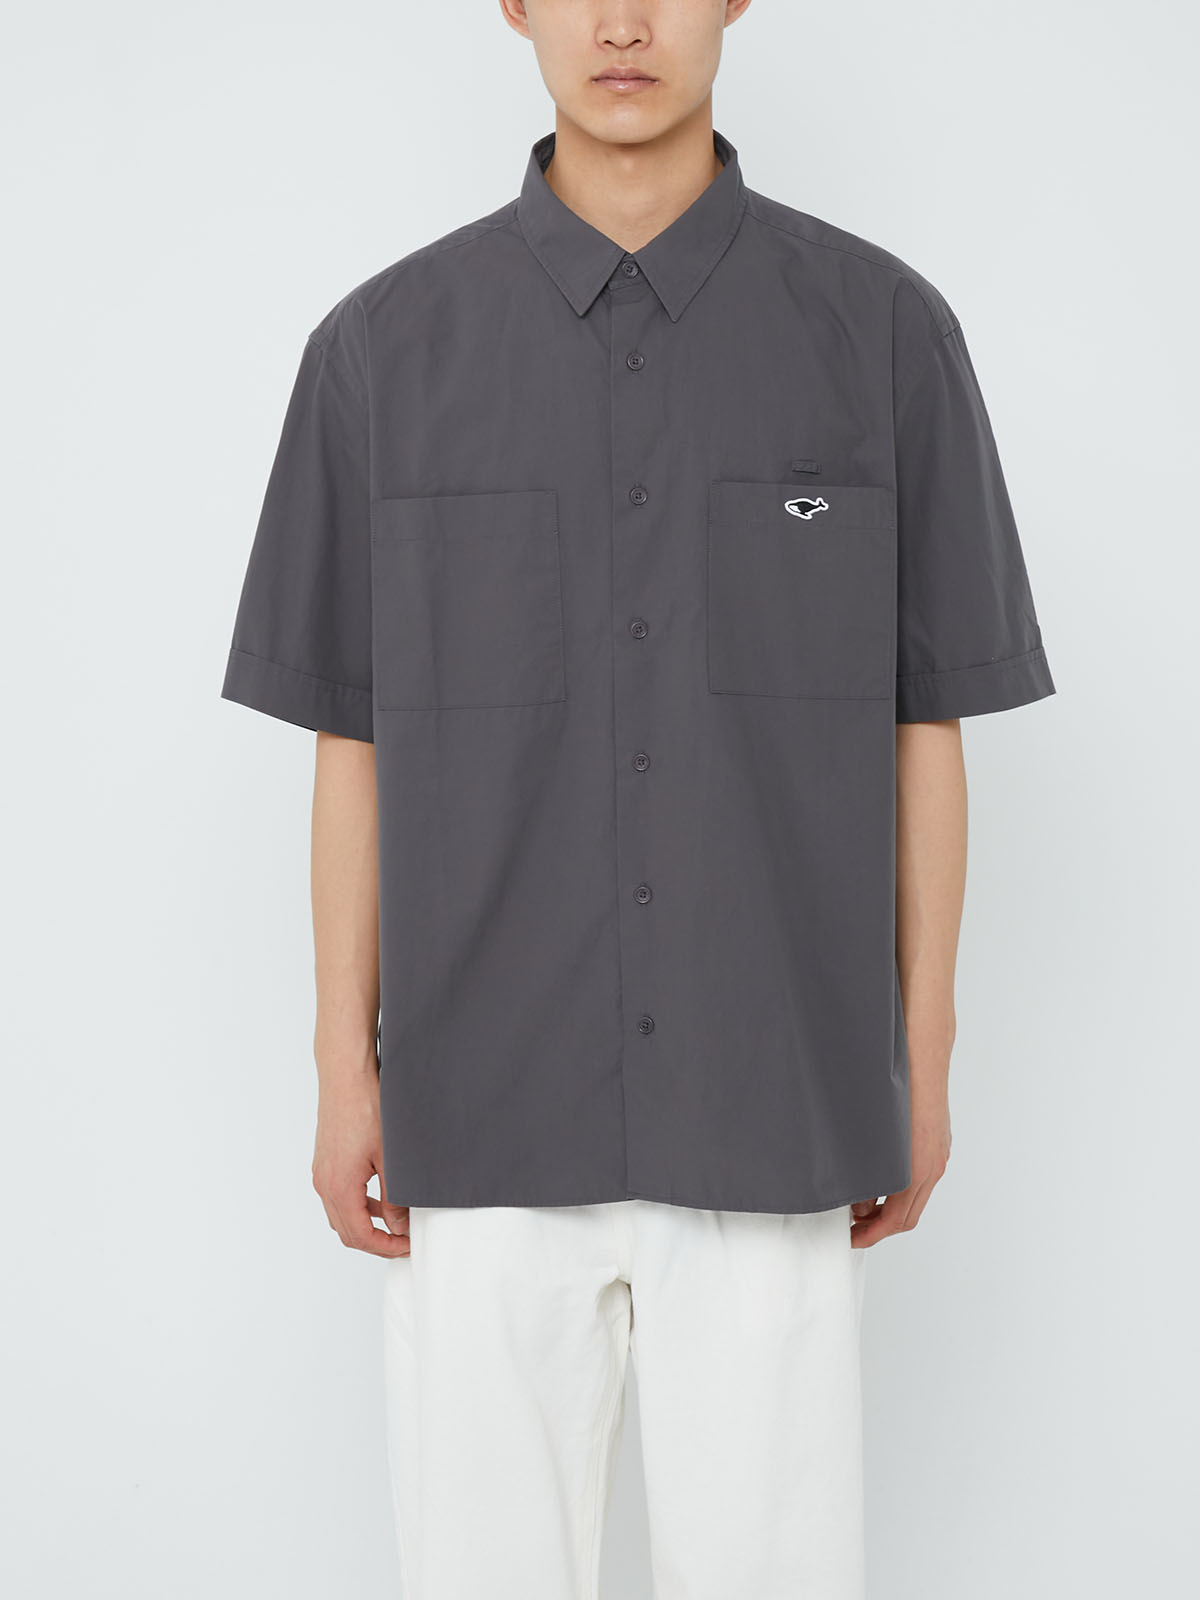 RELAXED S/S SHIRT (CHARCOAL)